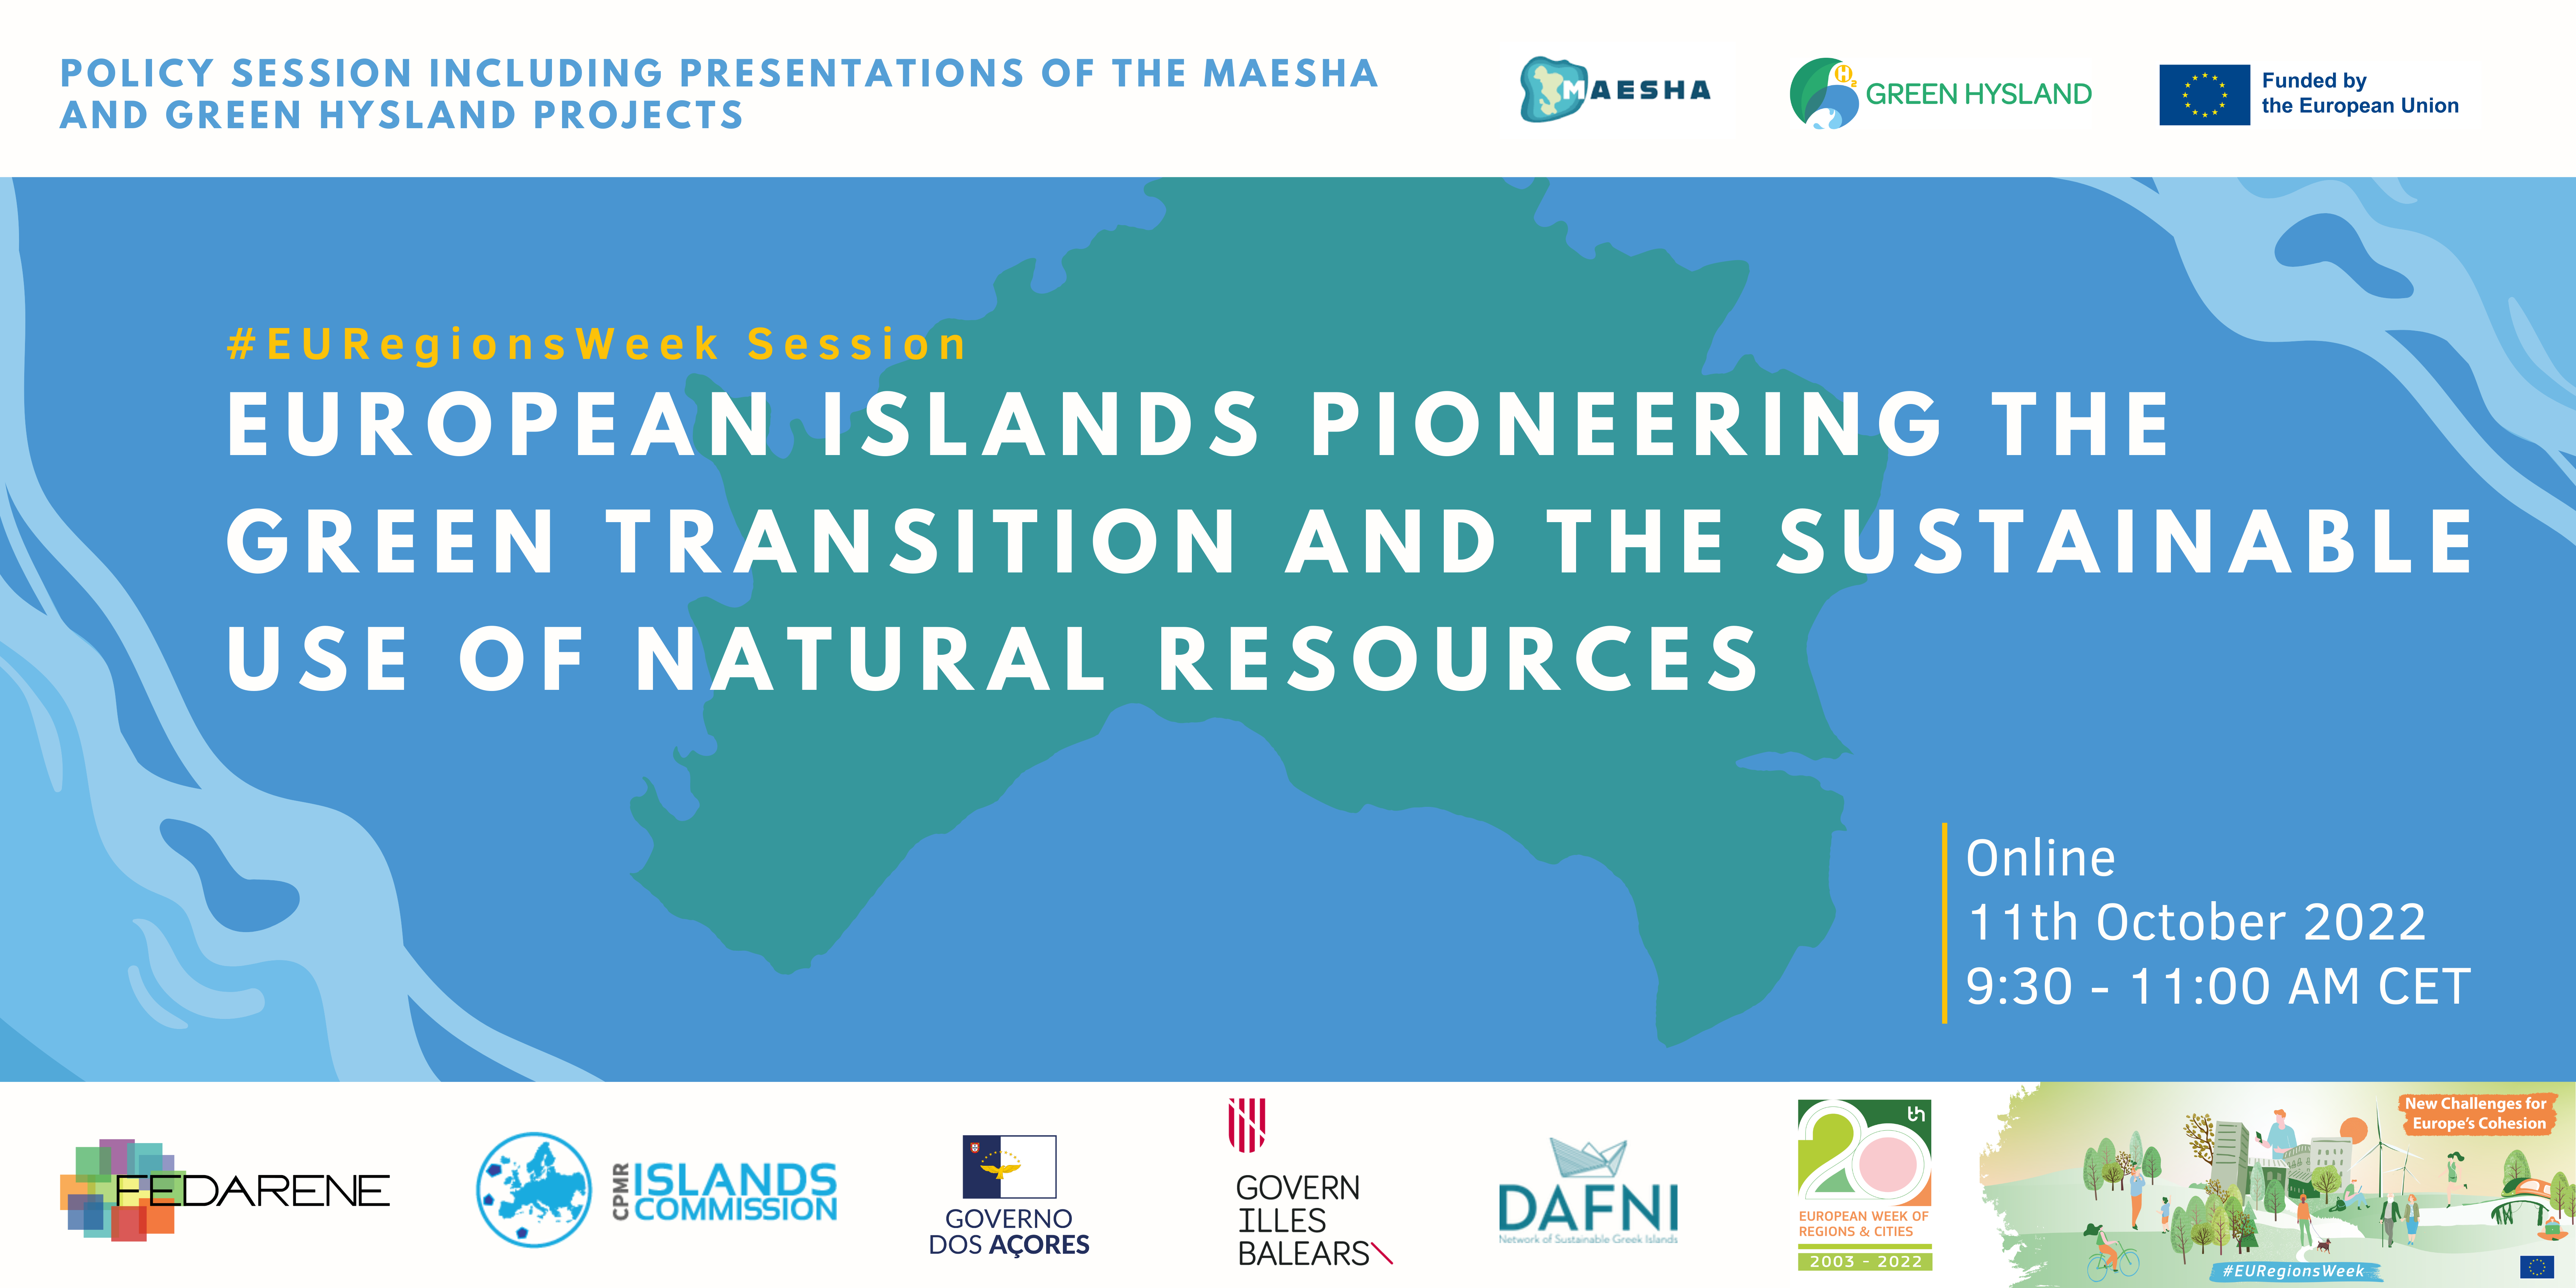 European Islands pioneering the Green Transition and the sustainable use of natural resources